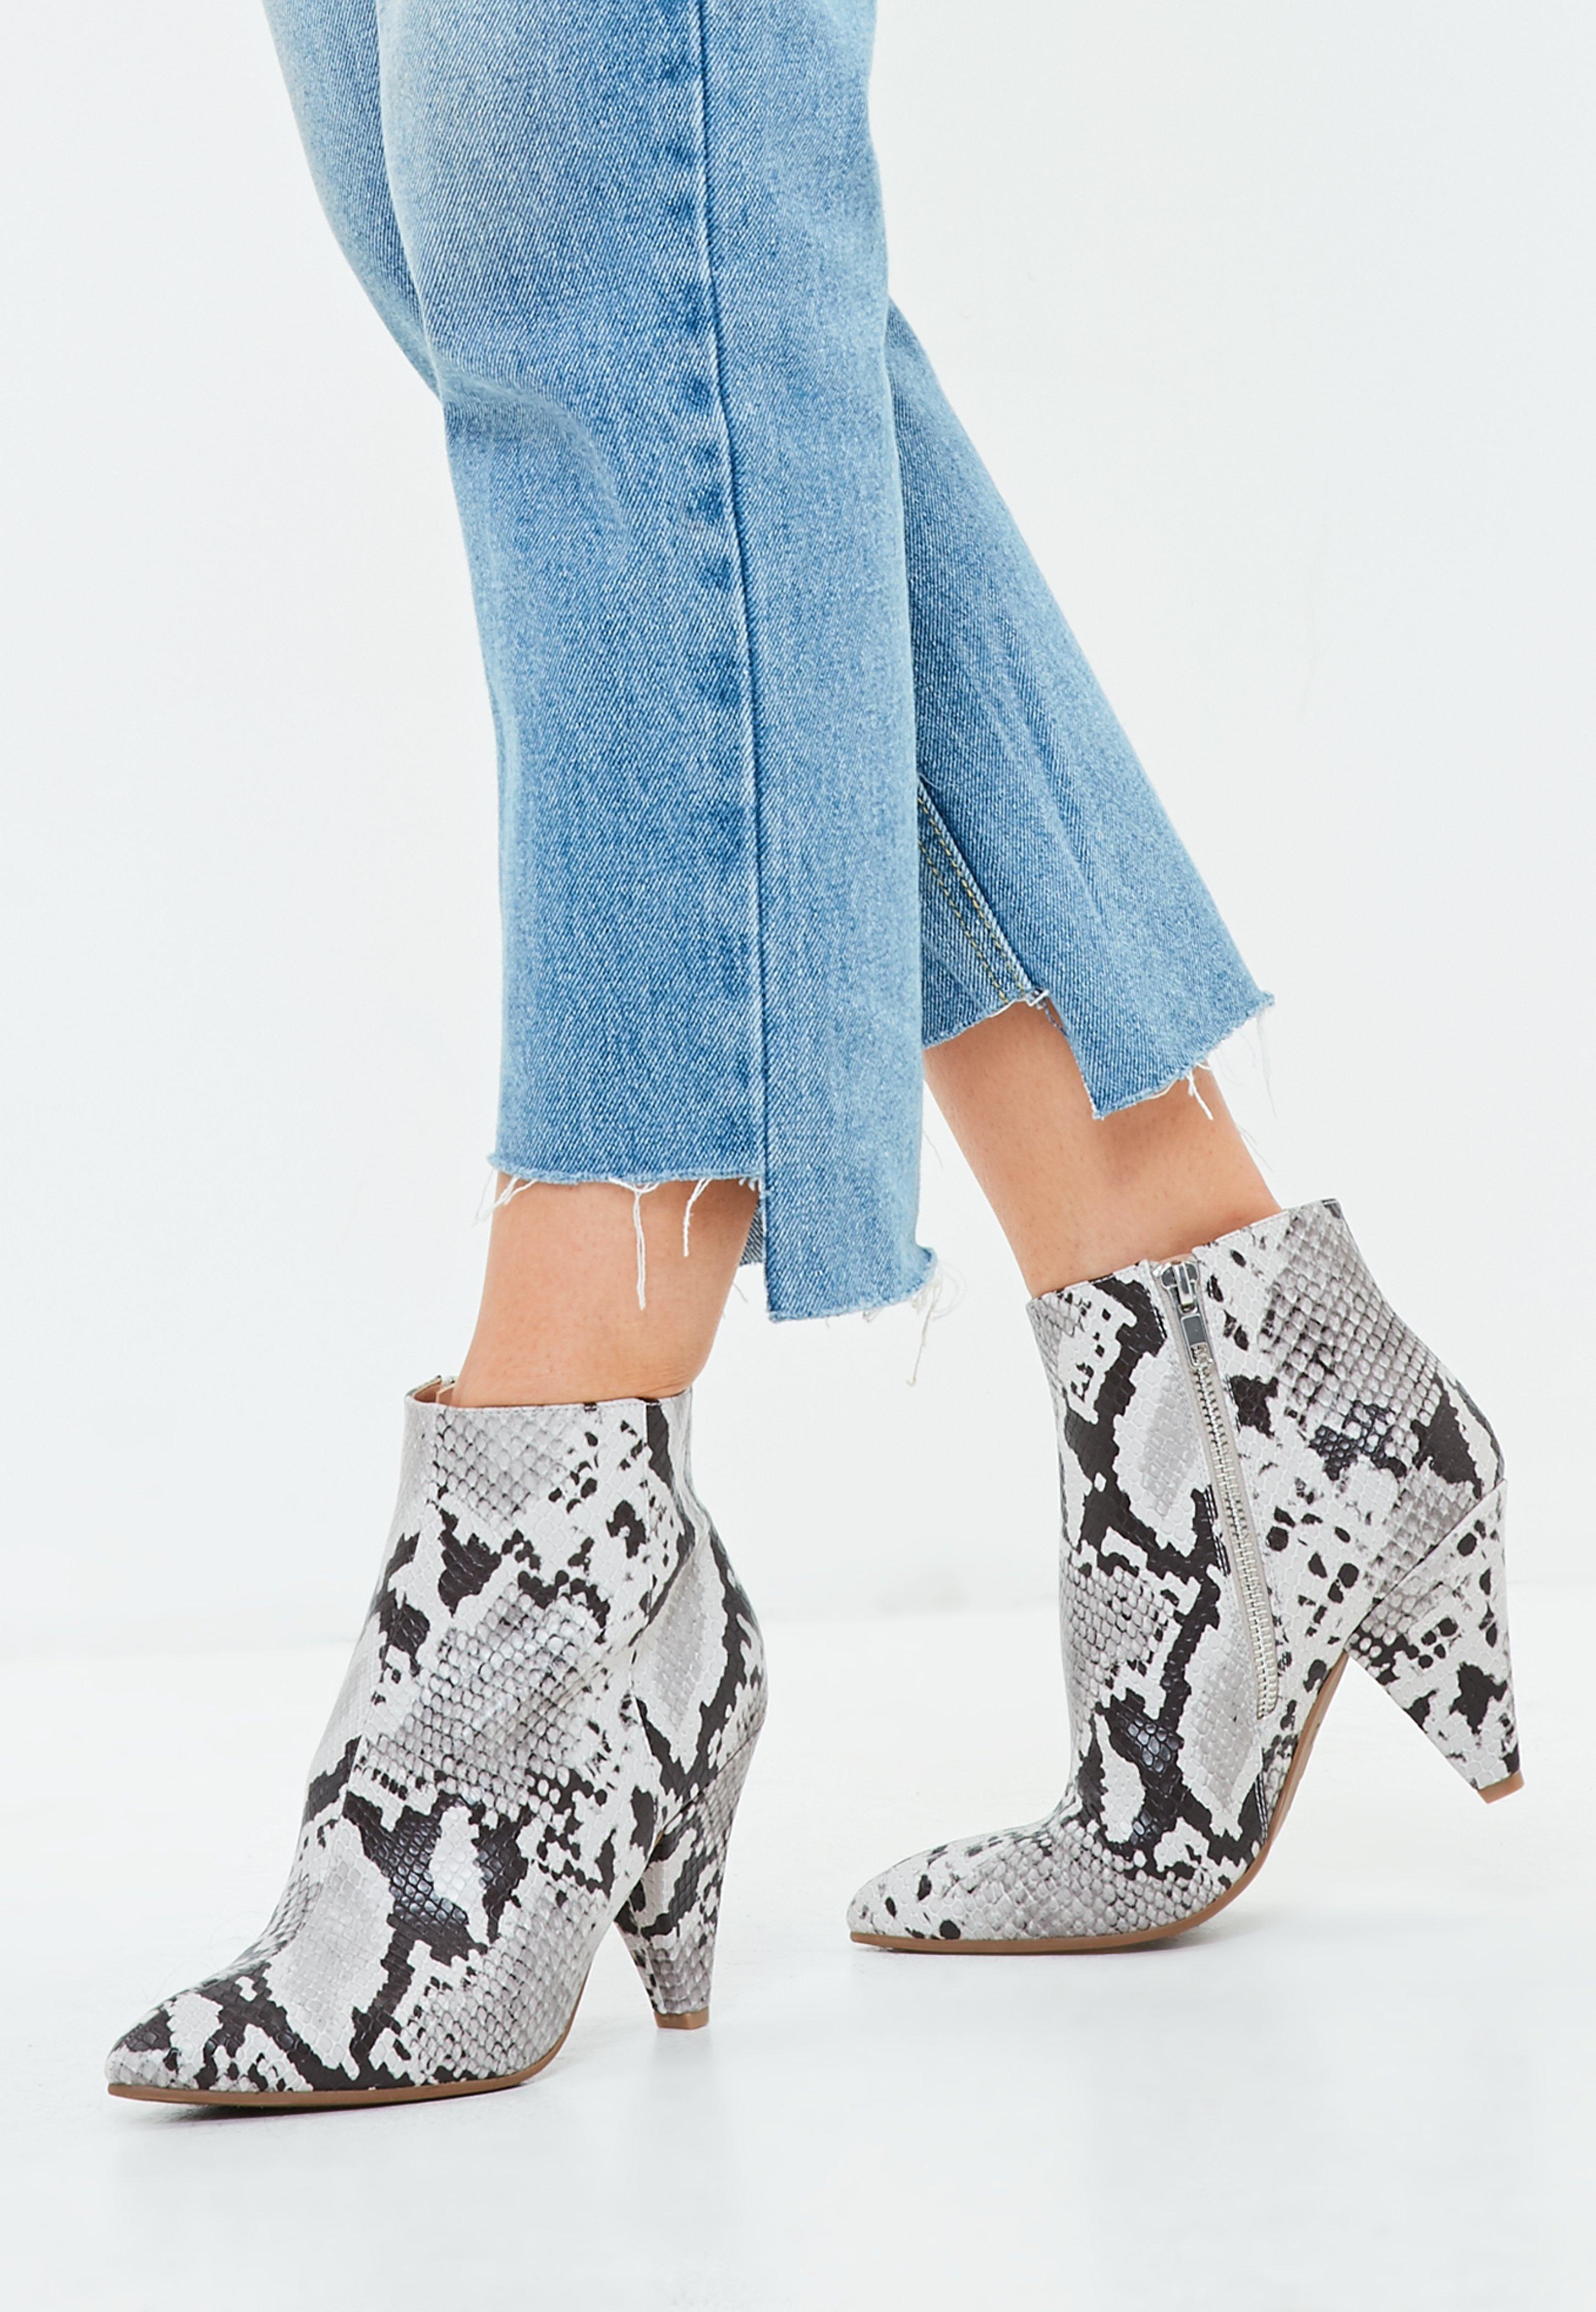 grey snake print boots factory outlet 0fd5d 4aa43